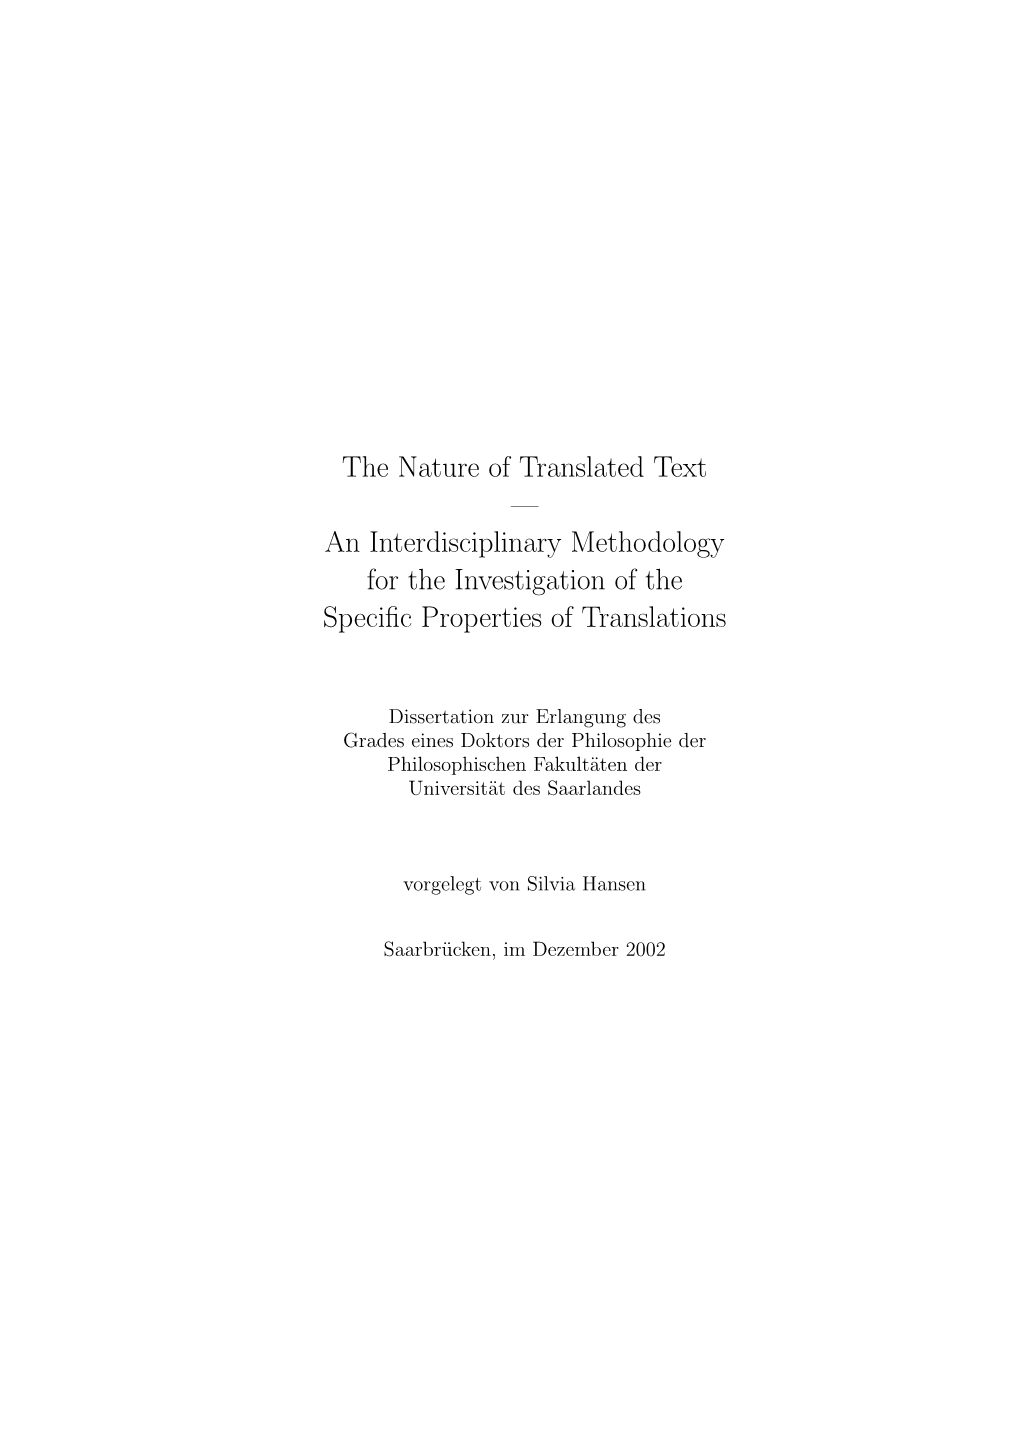 The Nature of Translated Text — an Interdisciplinary Methodology for the Investigation of the Speciﬁc Properties of Translations